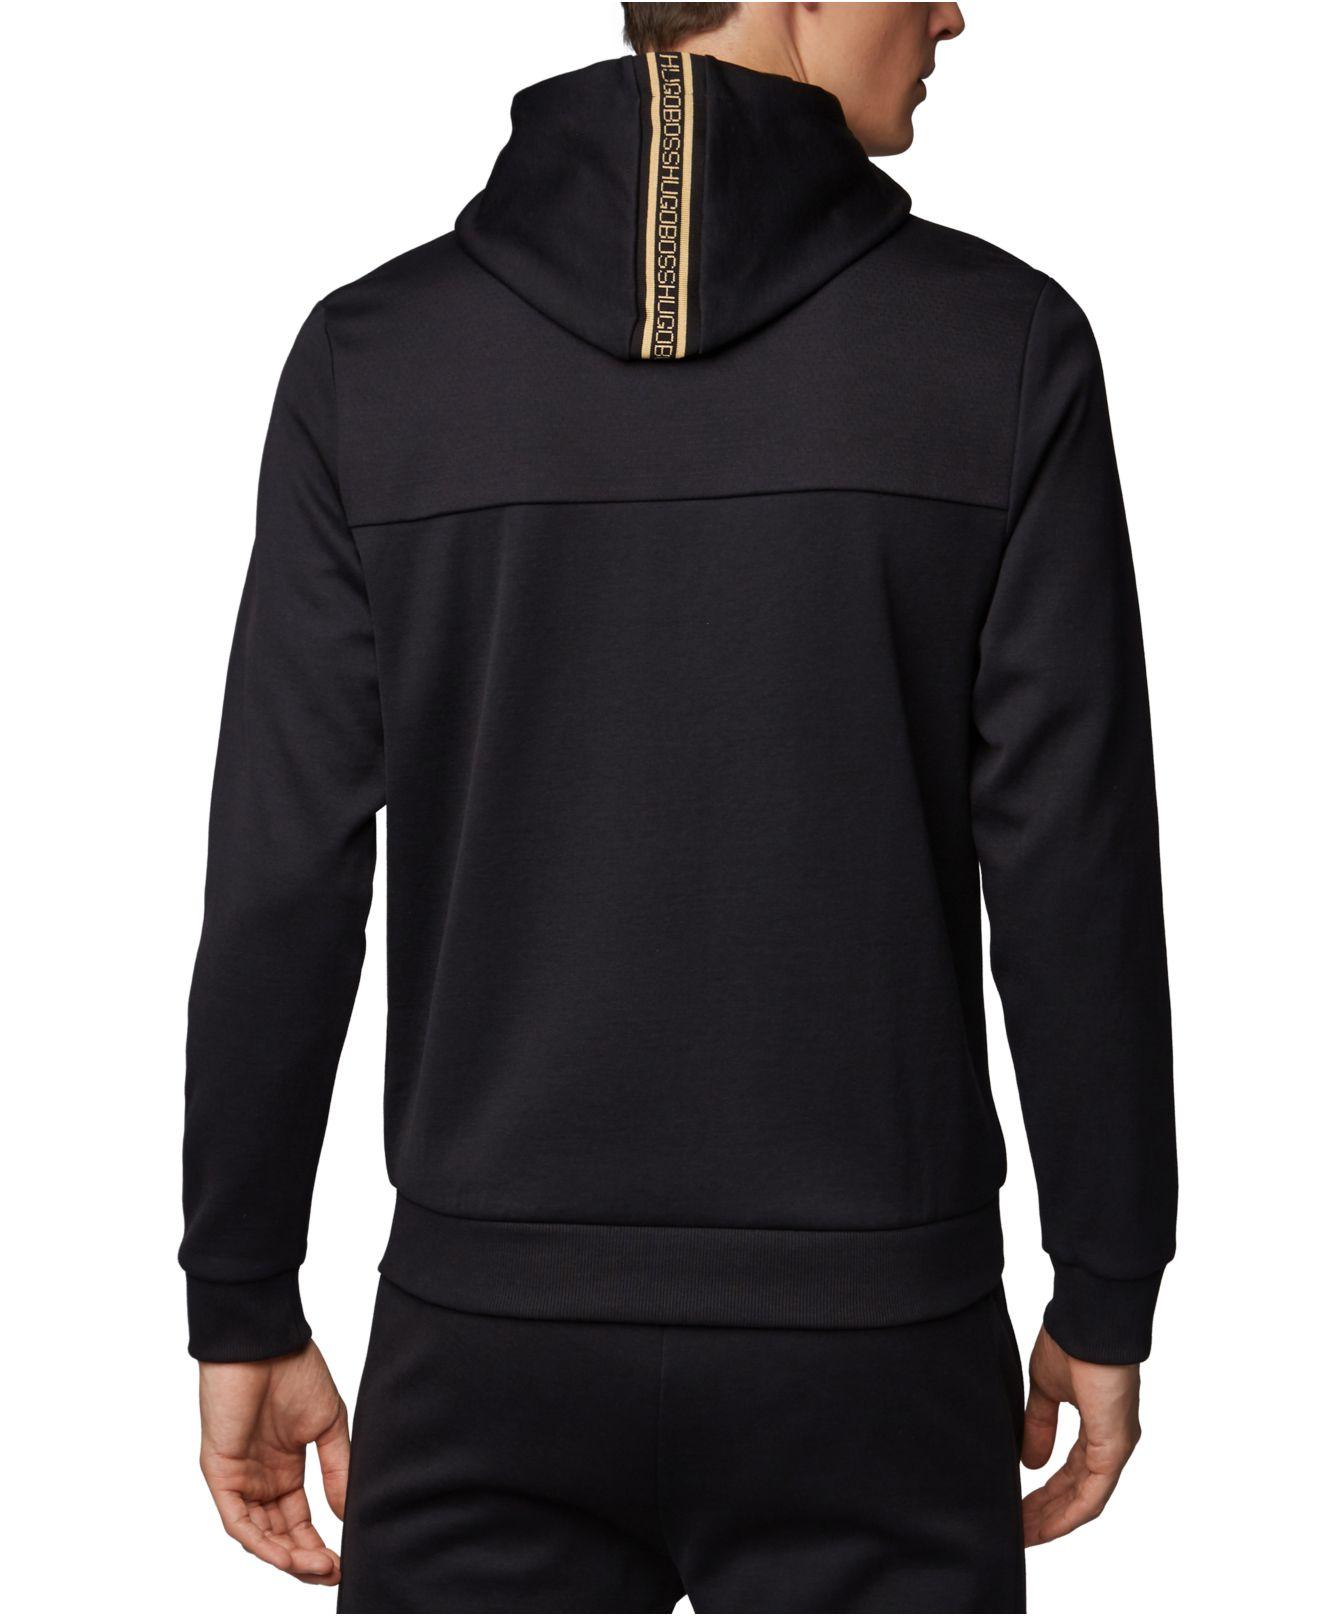 BOSS Cotton Curved Logo Zip-up Hoodie in Black for Men - Lyst